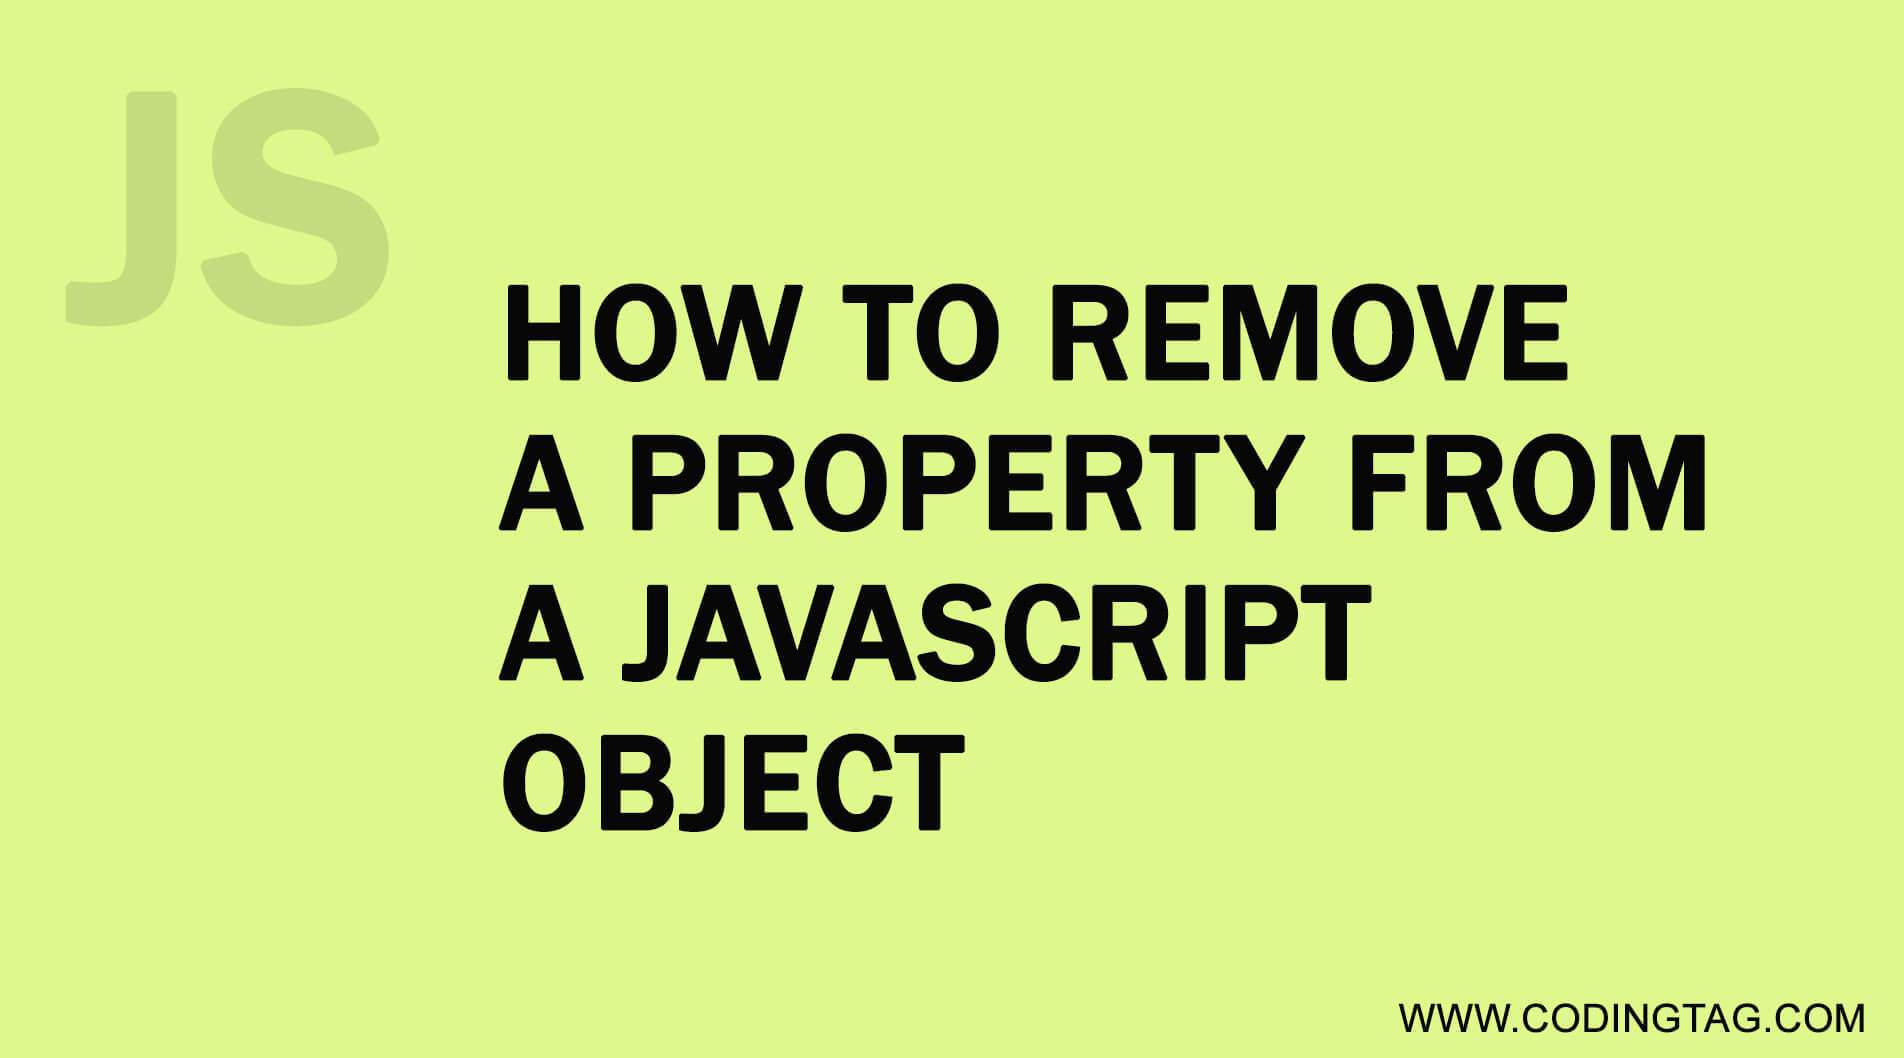 How to remove a property from a JavaScript Object?